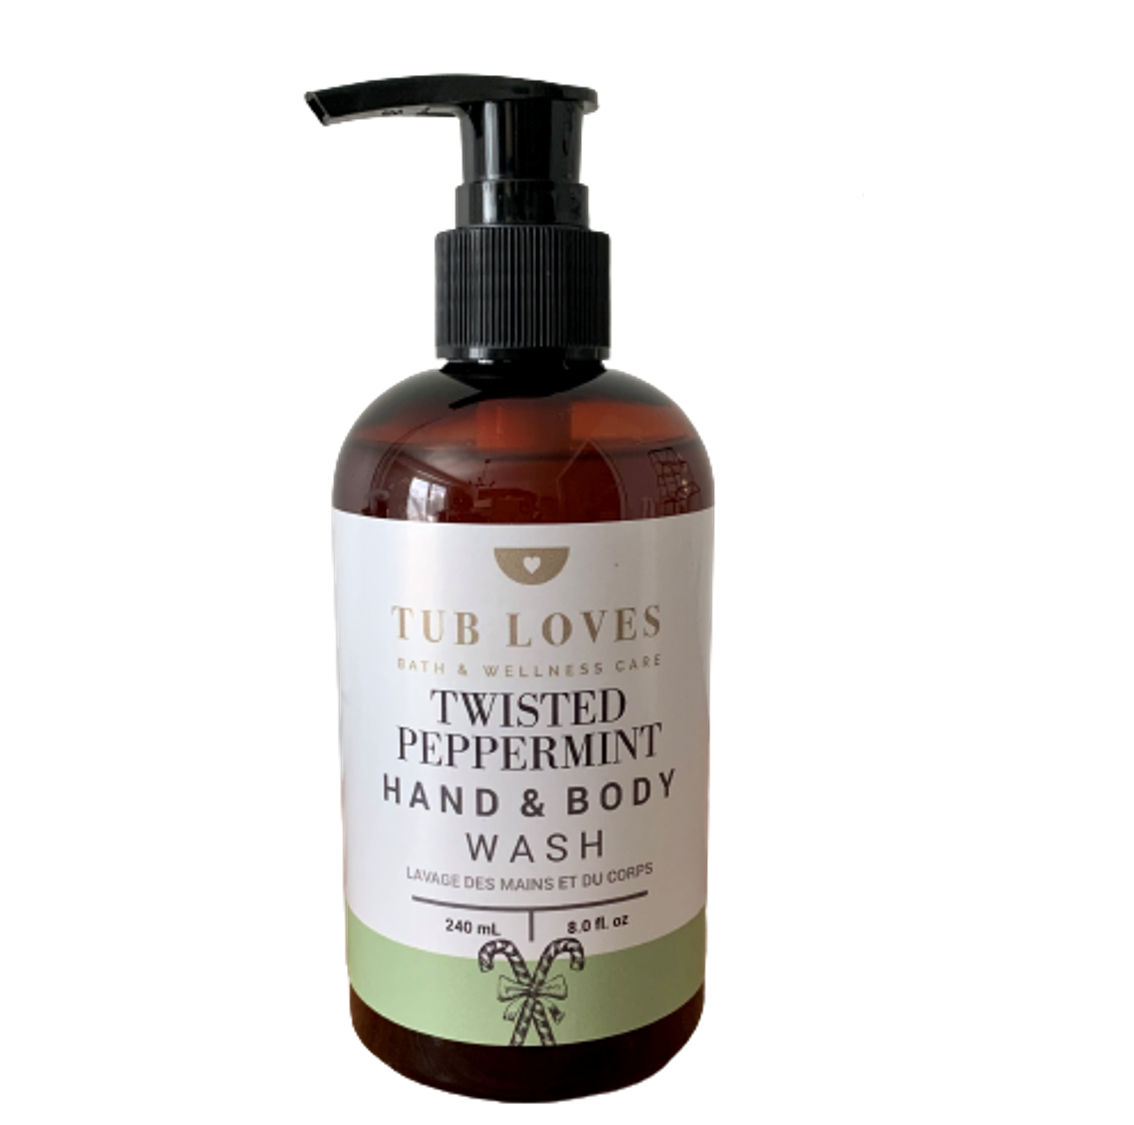 Twisted Peppermint - Hand and Body Wash - Tub Loves